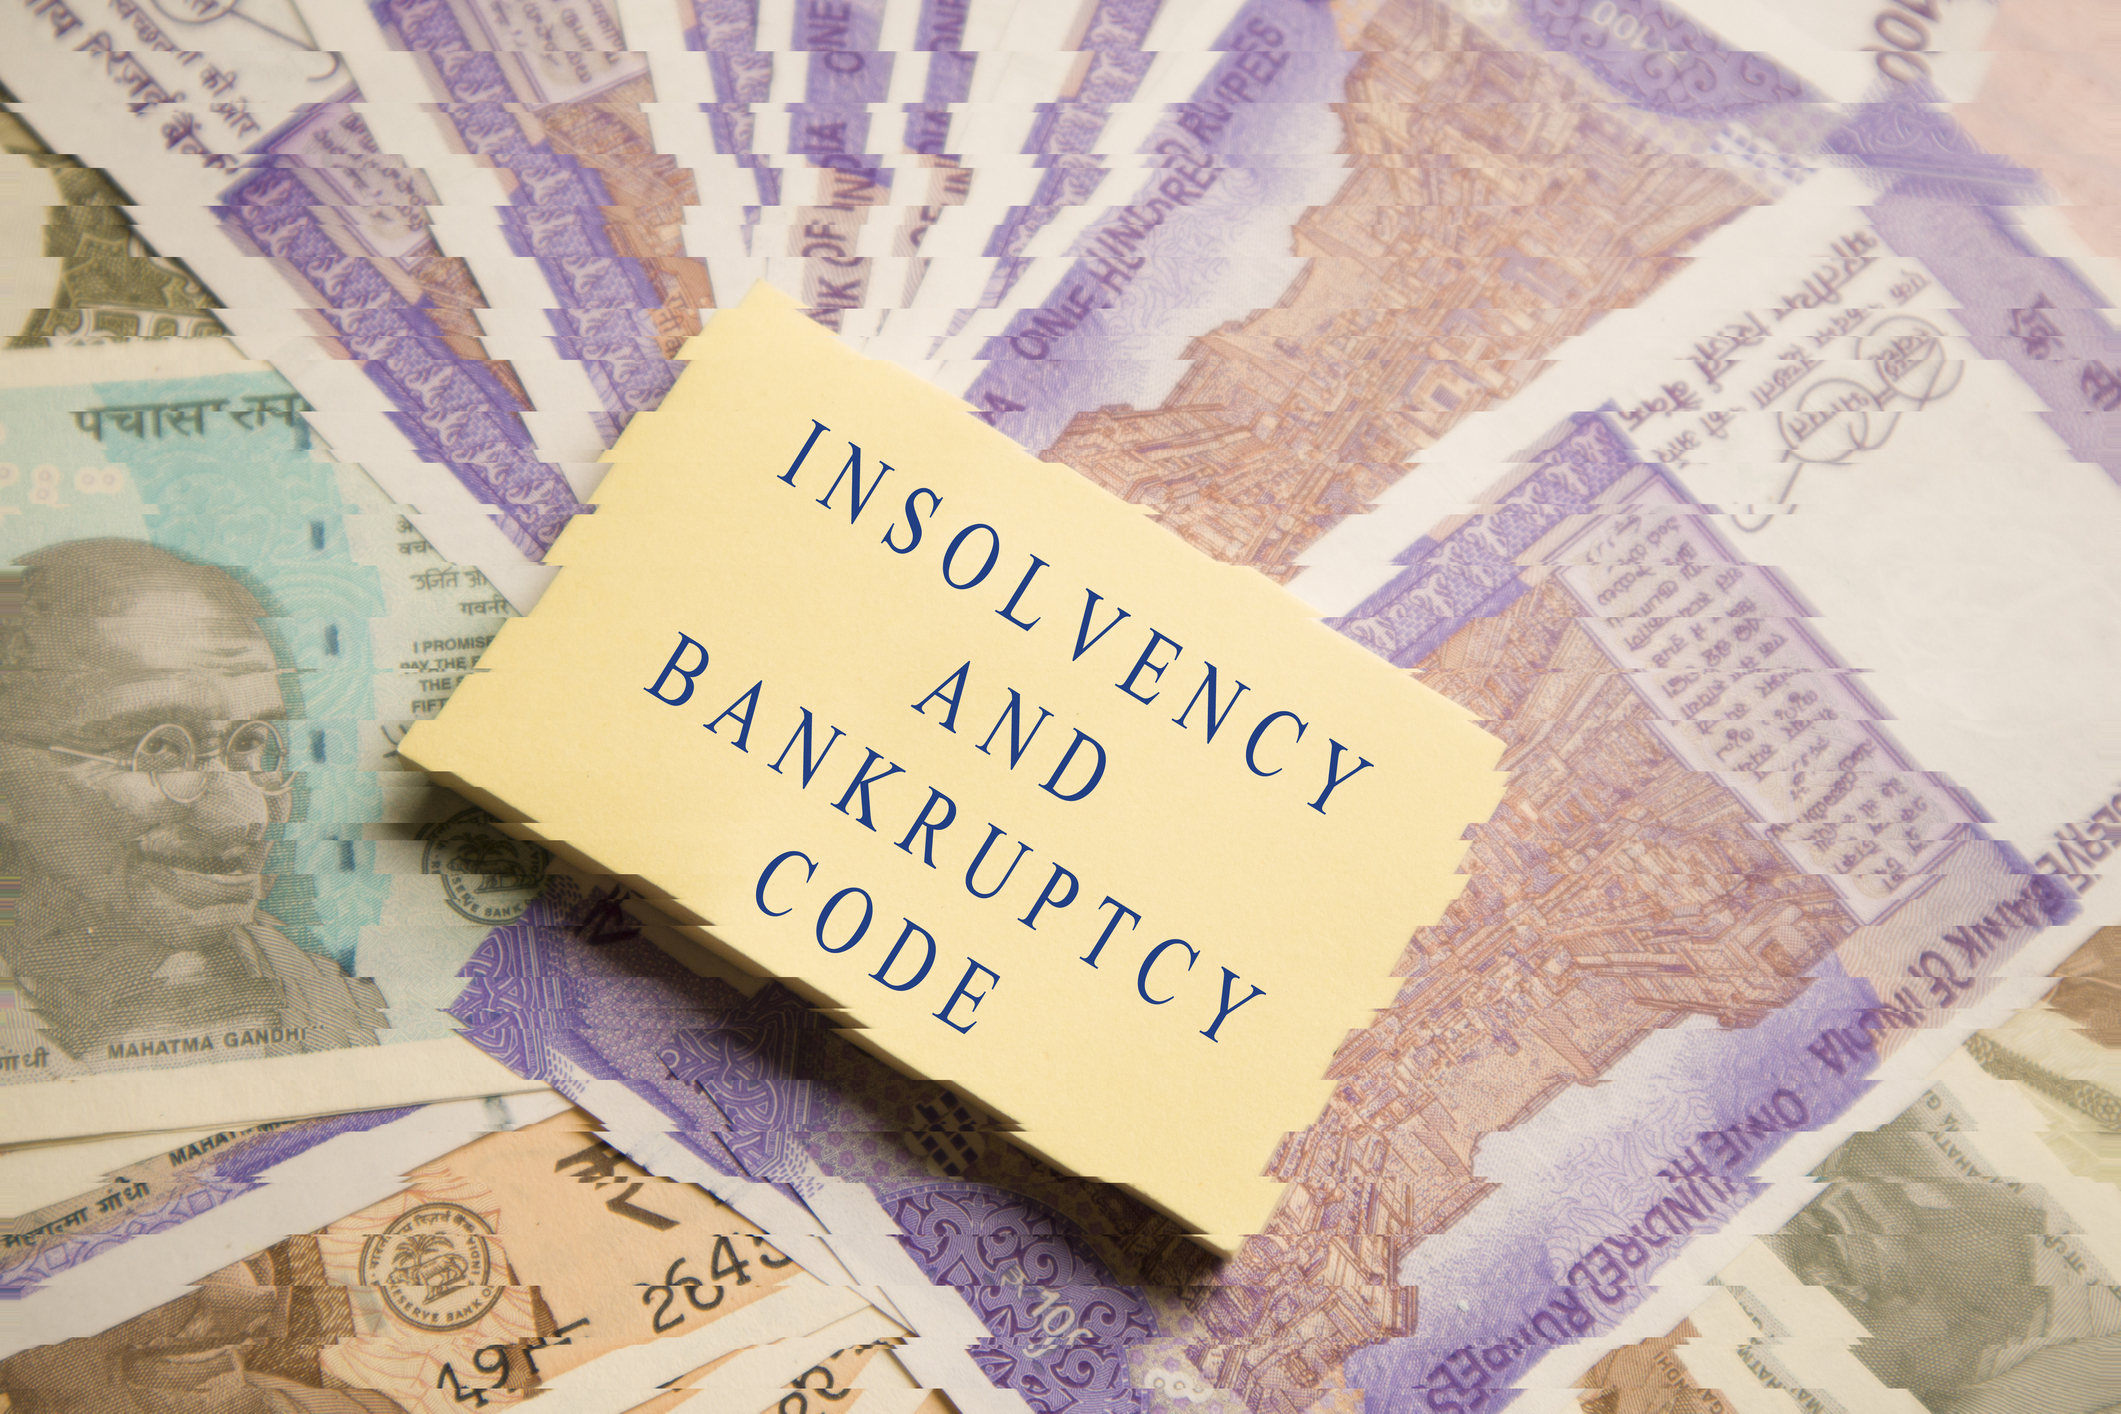 Recent developments in Indian insolvency law